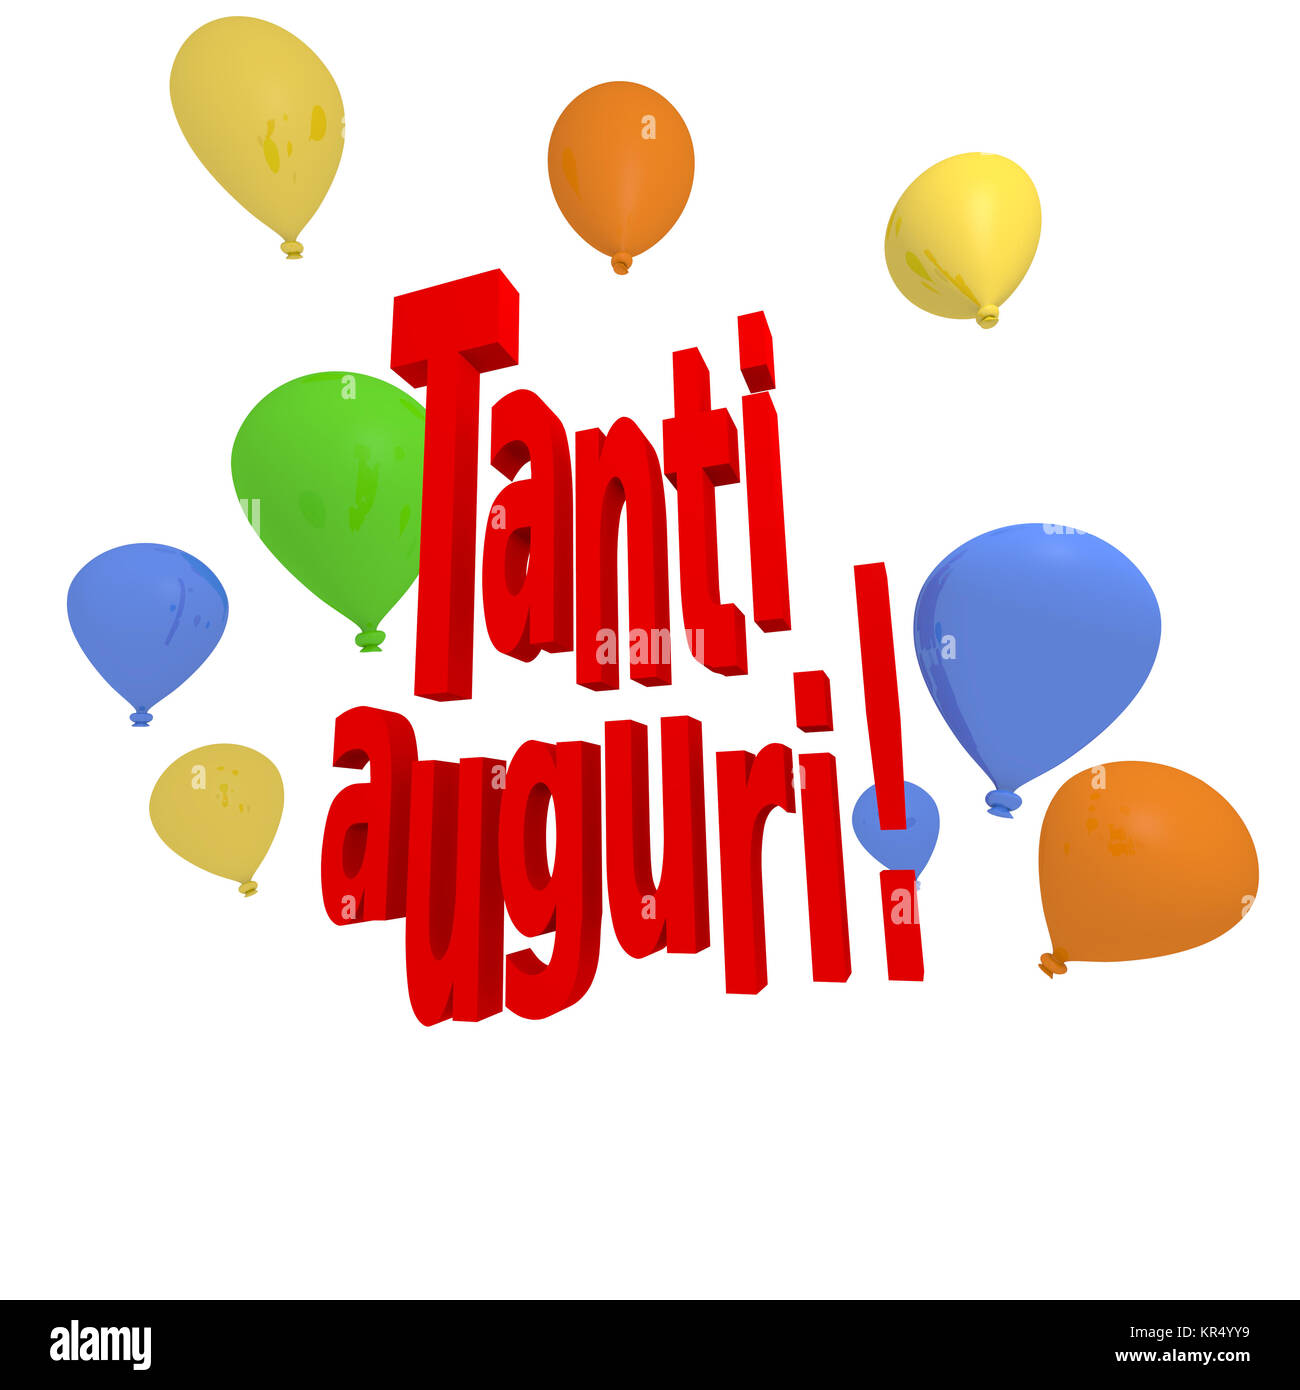 Italian Congratulation Concept Image Tanti Auguri With Colorful Balloons 3d Rendering Stock Photo Alamy